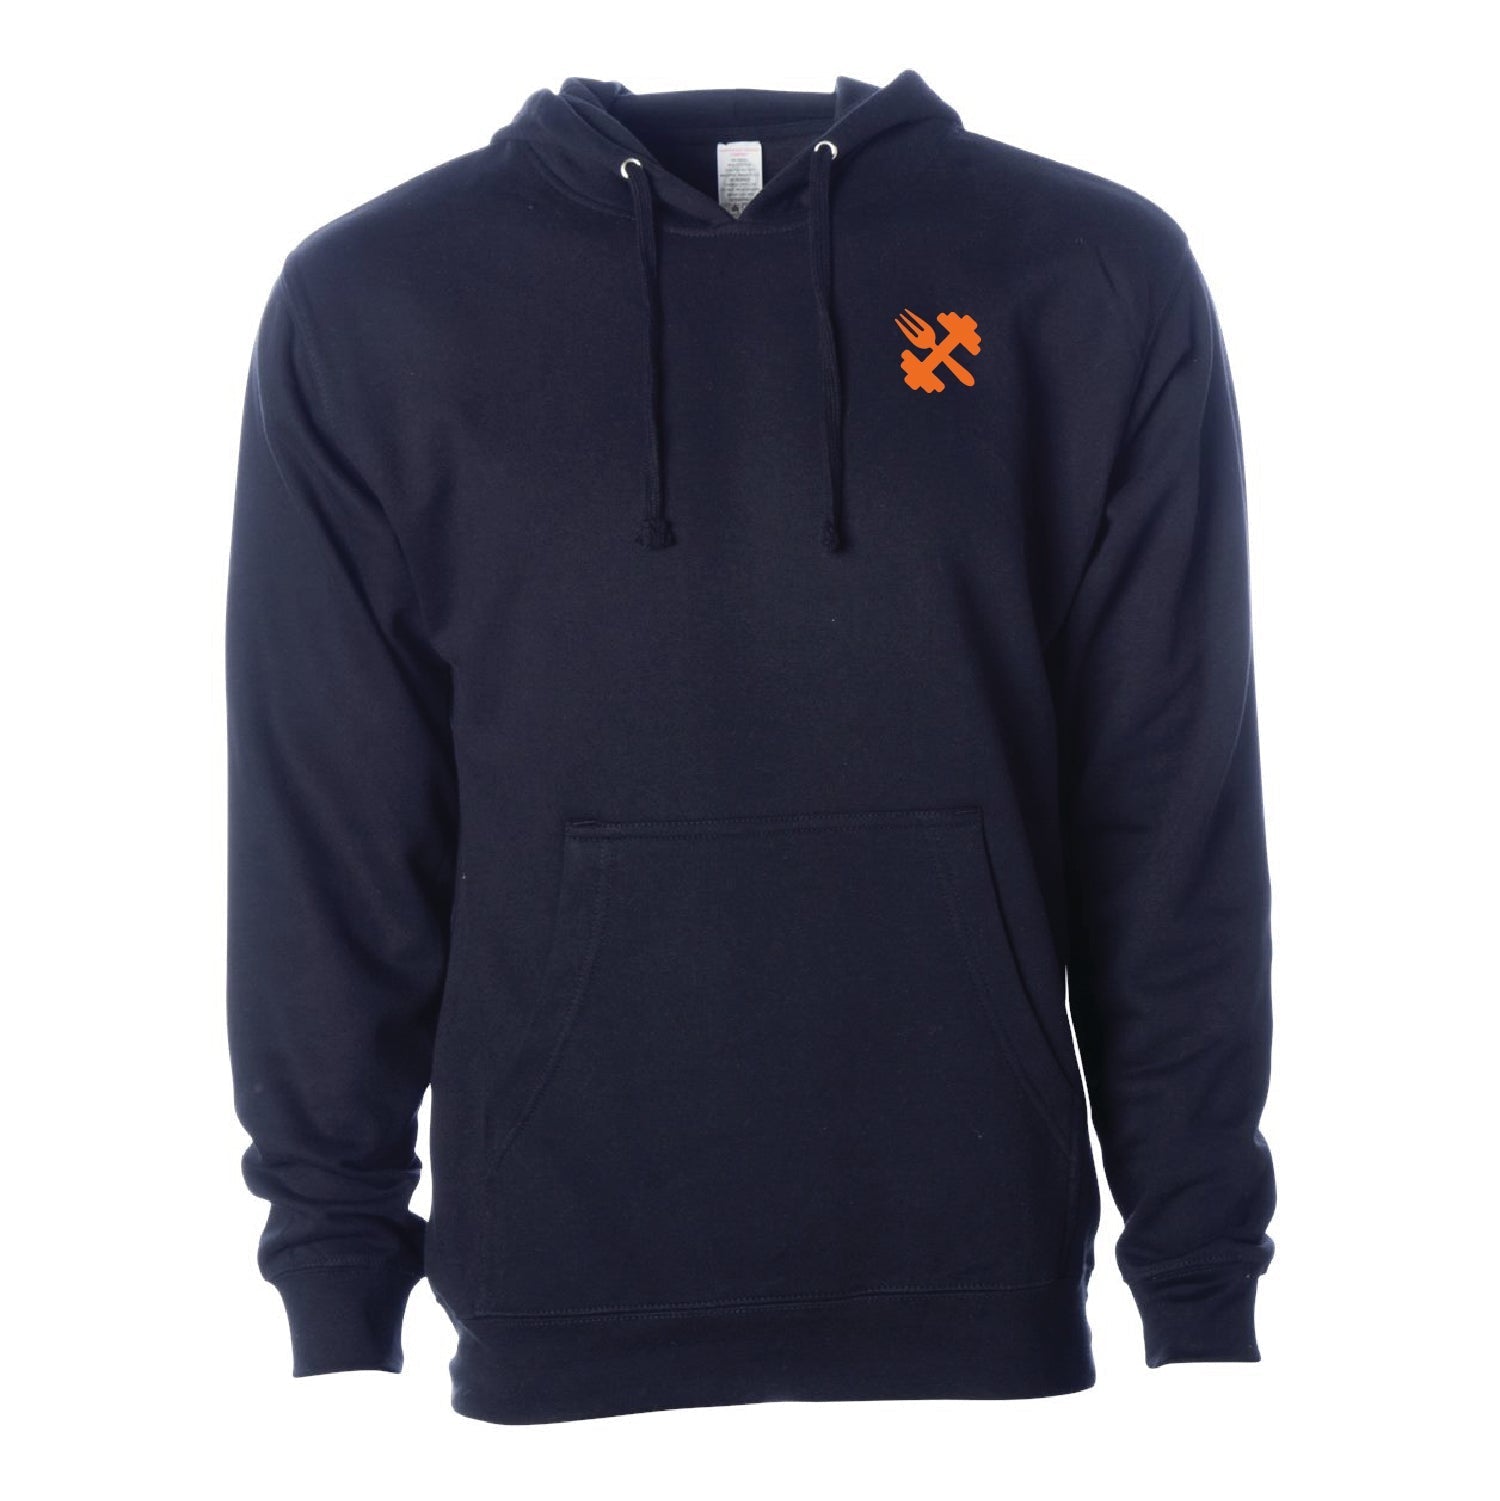 Nutrition & Exercise Unisex Midweight Hooded Sweatshirt - DSP On Demand